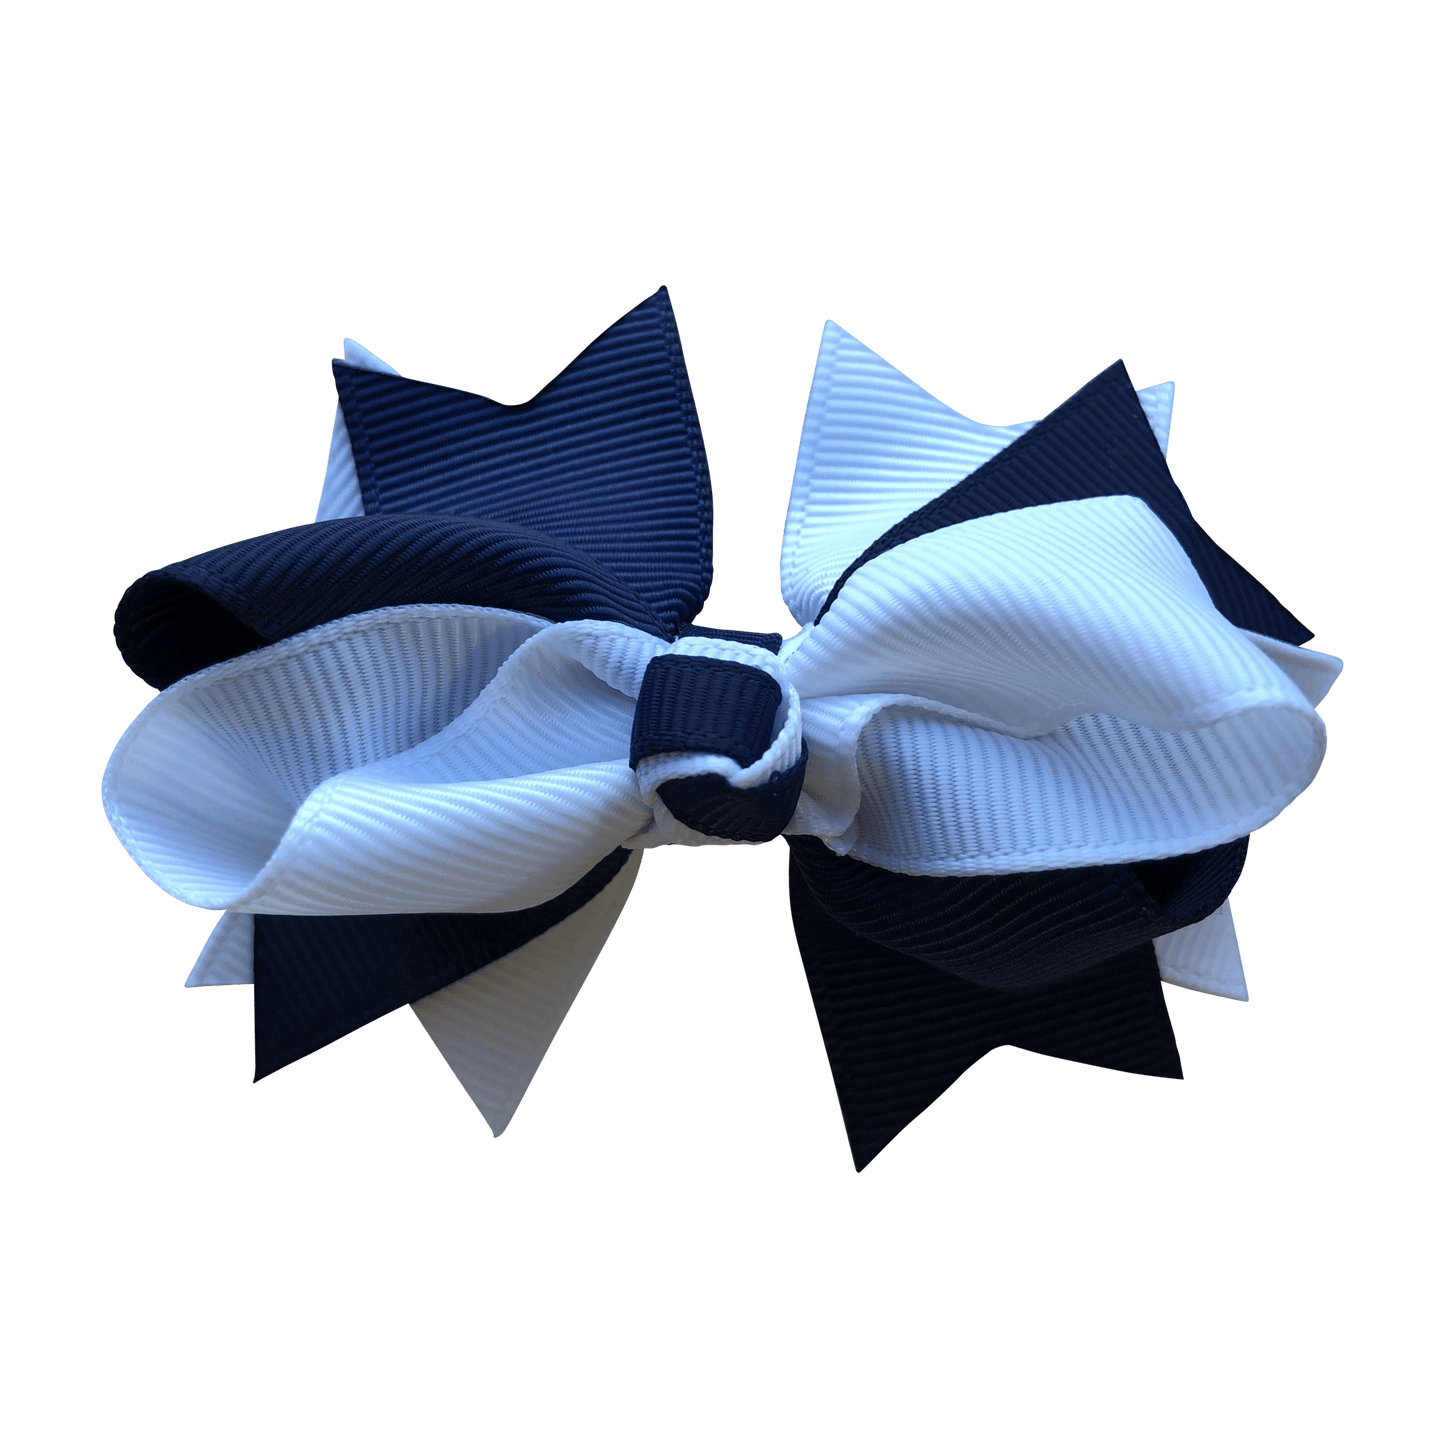 Navy & White Hair Accessories - Assorted Hair Accessories - School Uniform Hair Accessories - Ponytails and Fairytales